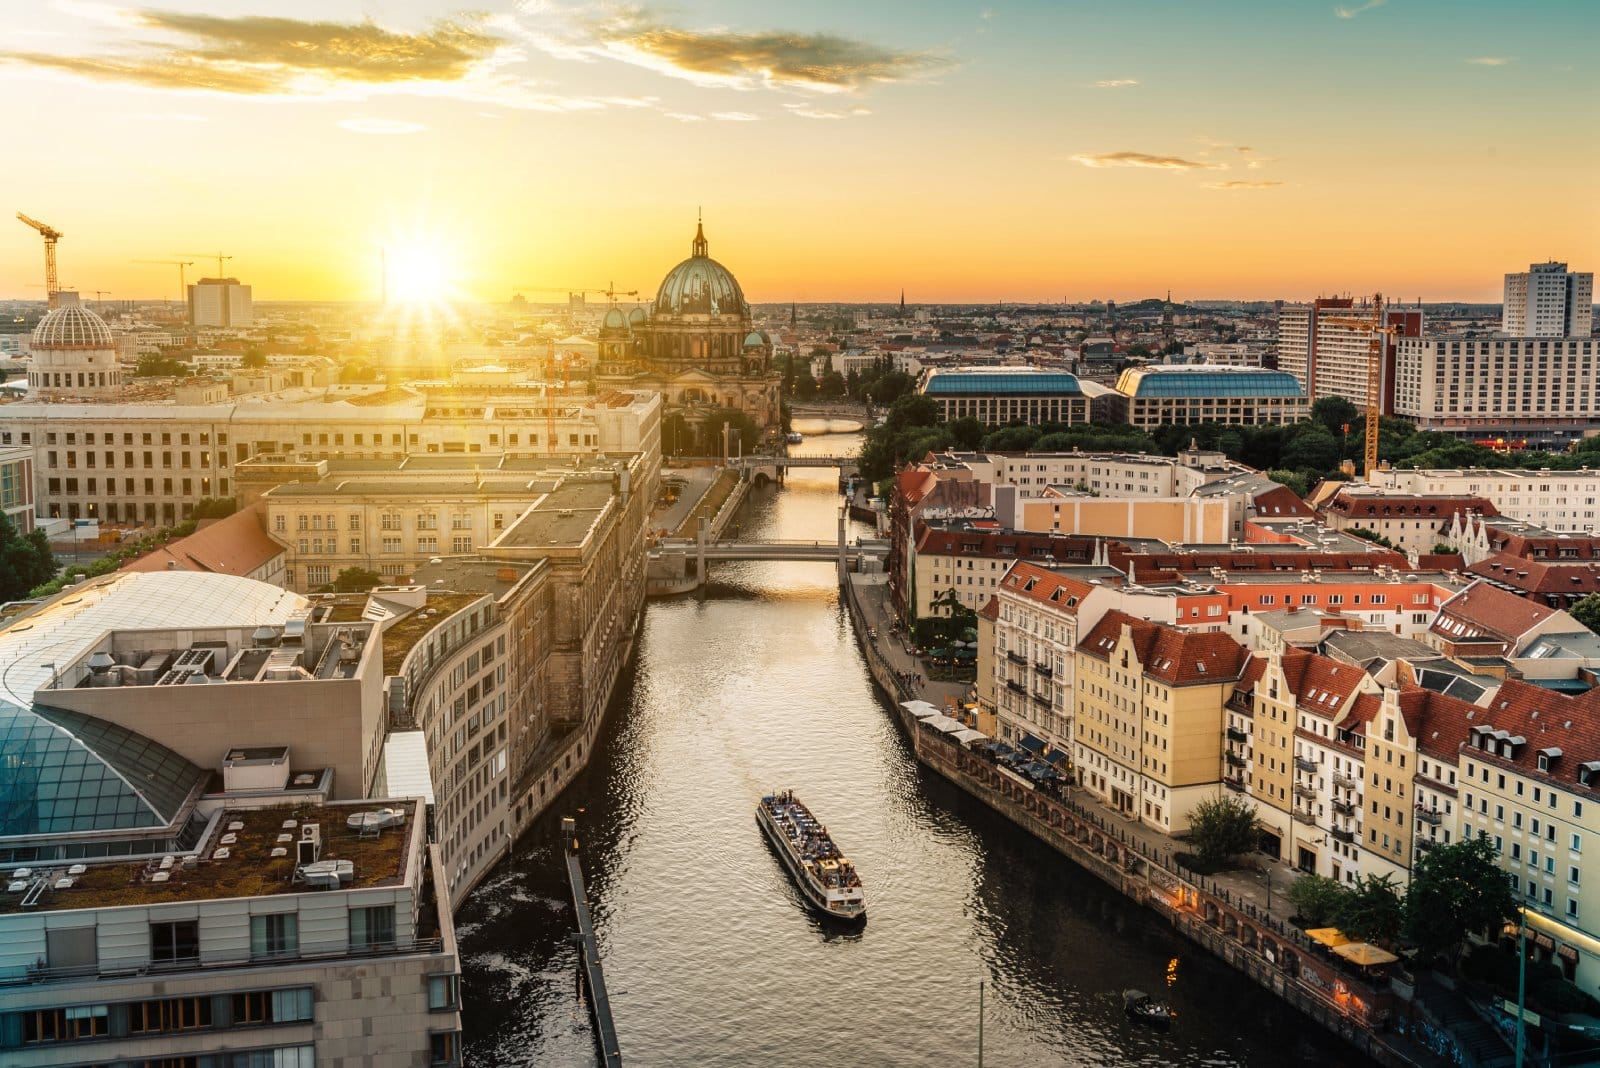 Image Credit: Shutterstock / Patino <p><span>Berlin’s reputation as a leading LGBTQ+ destination is well-earned, with its progressive culture, extensive history, and dynamic nightlife. The city’s LGBTQ+ scene, centered around the Schöneberg district since the 1920s, offers a vast array of bars, clubs, and cafes, catering to a diverse spectrum of the community. Berlin is also home to the Schwules Museum, one of the world’s first museums dedicated to LGBTQ+ history and culture. Events like the Berlin Pride (CSD) and the queer arts festival, Berlinale, highlight the city’s ongoing commitment to LGBTQ+ rights and expression.</span></p> <p><b>Insider’s Tip: </b><span>For a unique night out, explore Kreuzberg and Neukölln districts, which host a younger, alternative LGBTQ+ scene compared to the traditional Schöneberg.</span></p> <p><b>When to Travel: </b><span>Summer months bring the city to life with numerous festivals and events, including Berlin Pride in July, making it an ideal time to visit.</span></p> <p><b>How to Get There: </b><span>Berlin is served by two major airports: Berlin Tegel and Berlin Schönefeld. The city’s extensive public transport system makes navigating between districts easy and efficient.</span></p>